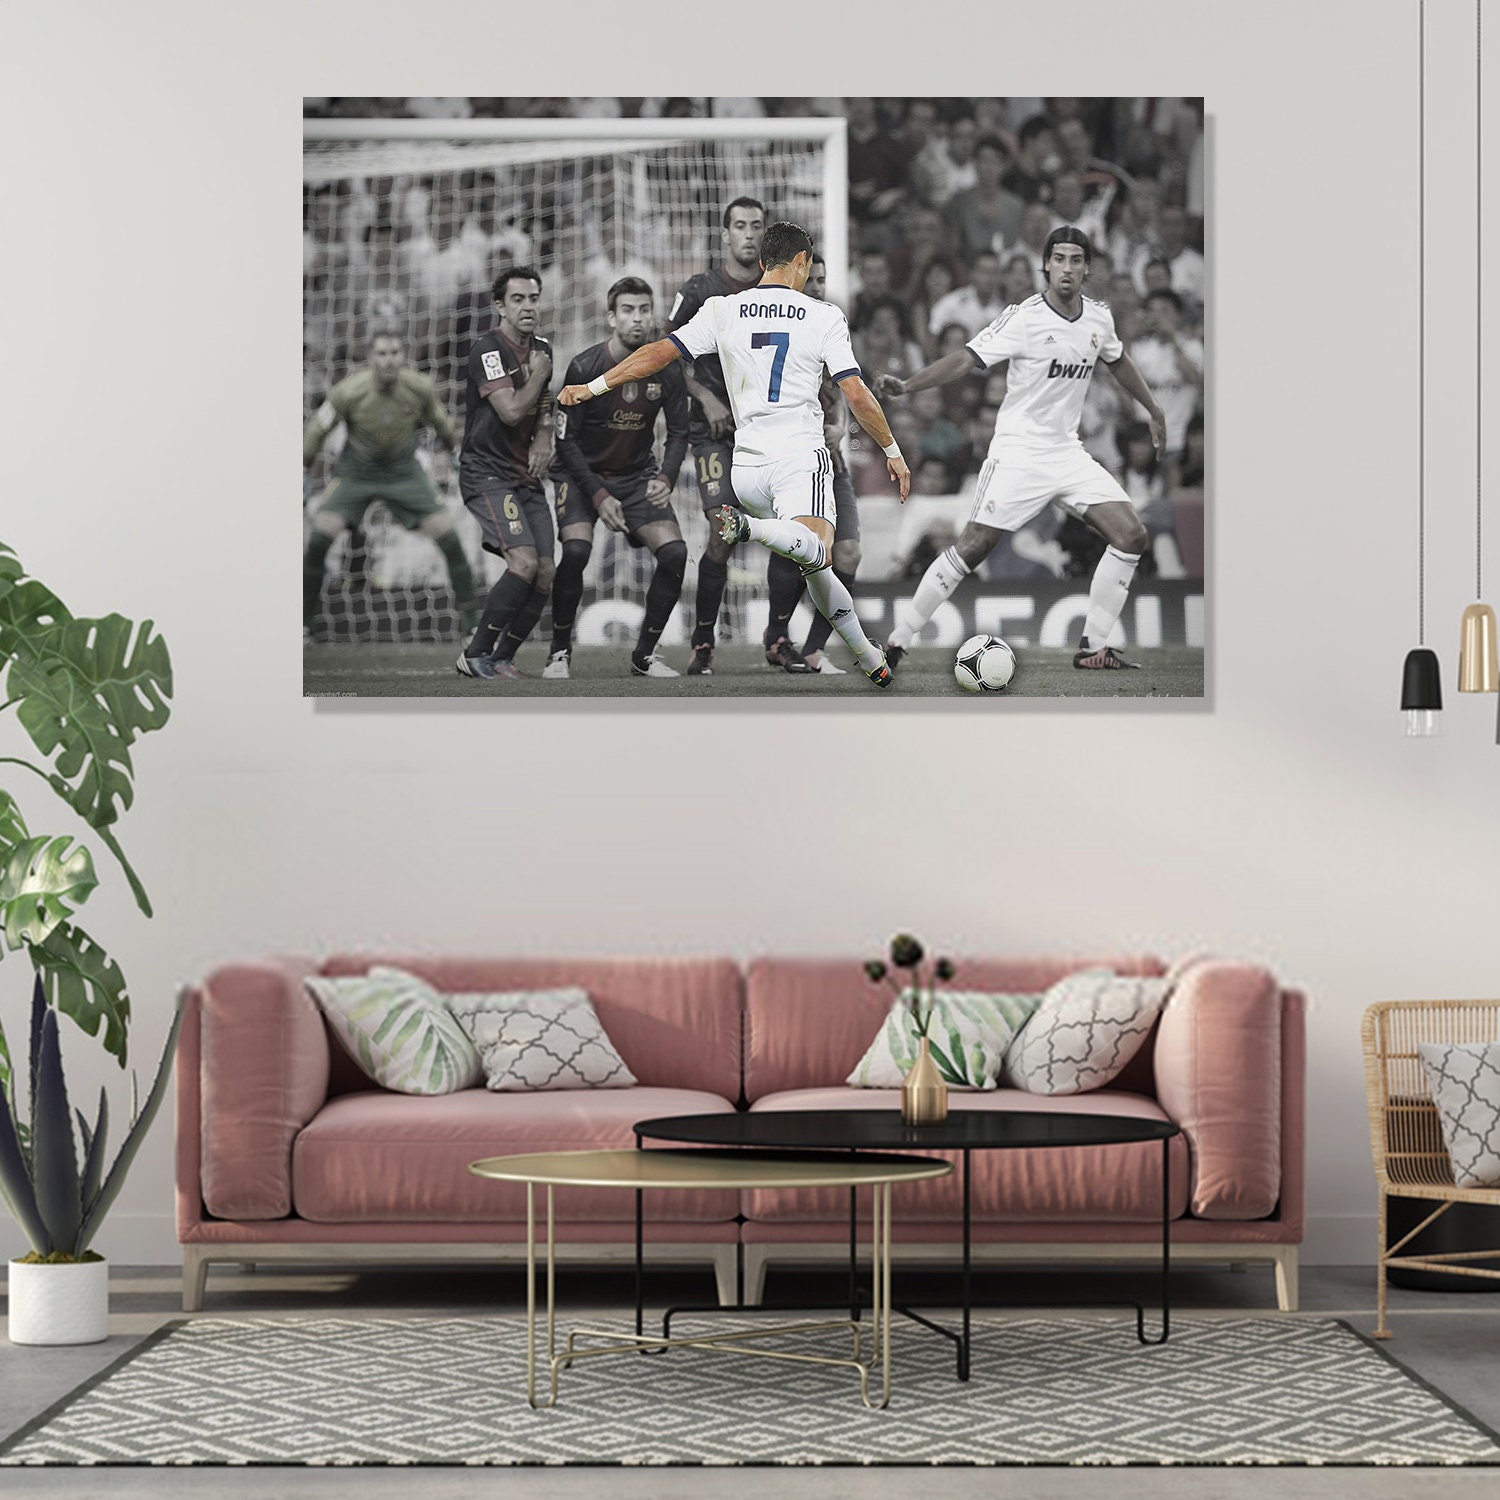 Cristiano RONALDO Photo Picture Print On Framed Canvas Wall Art Home Decoration 